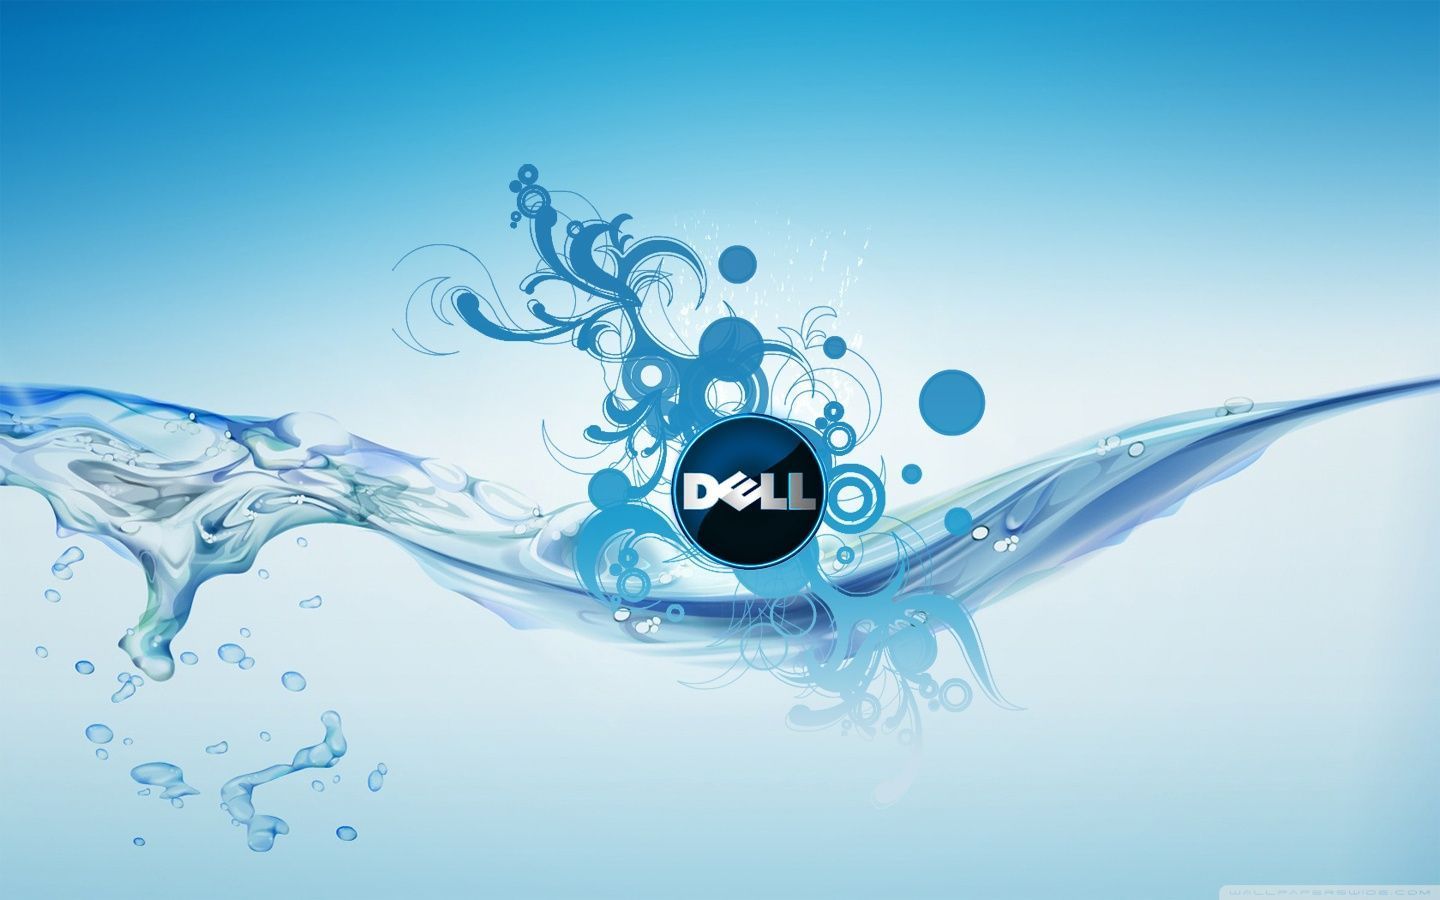 Dell Latitude Hd Your Top HD Wallpapers #ID63004